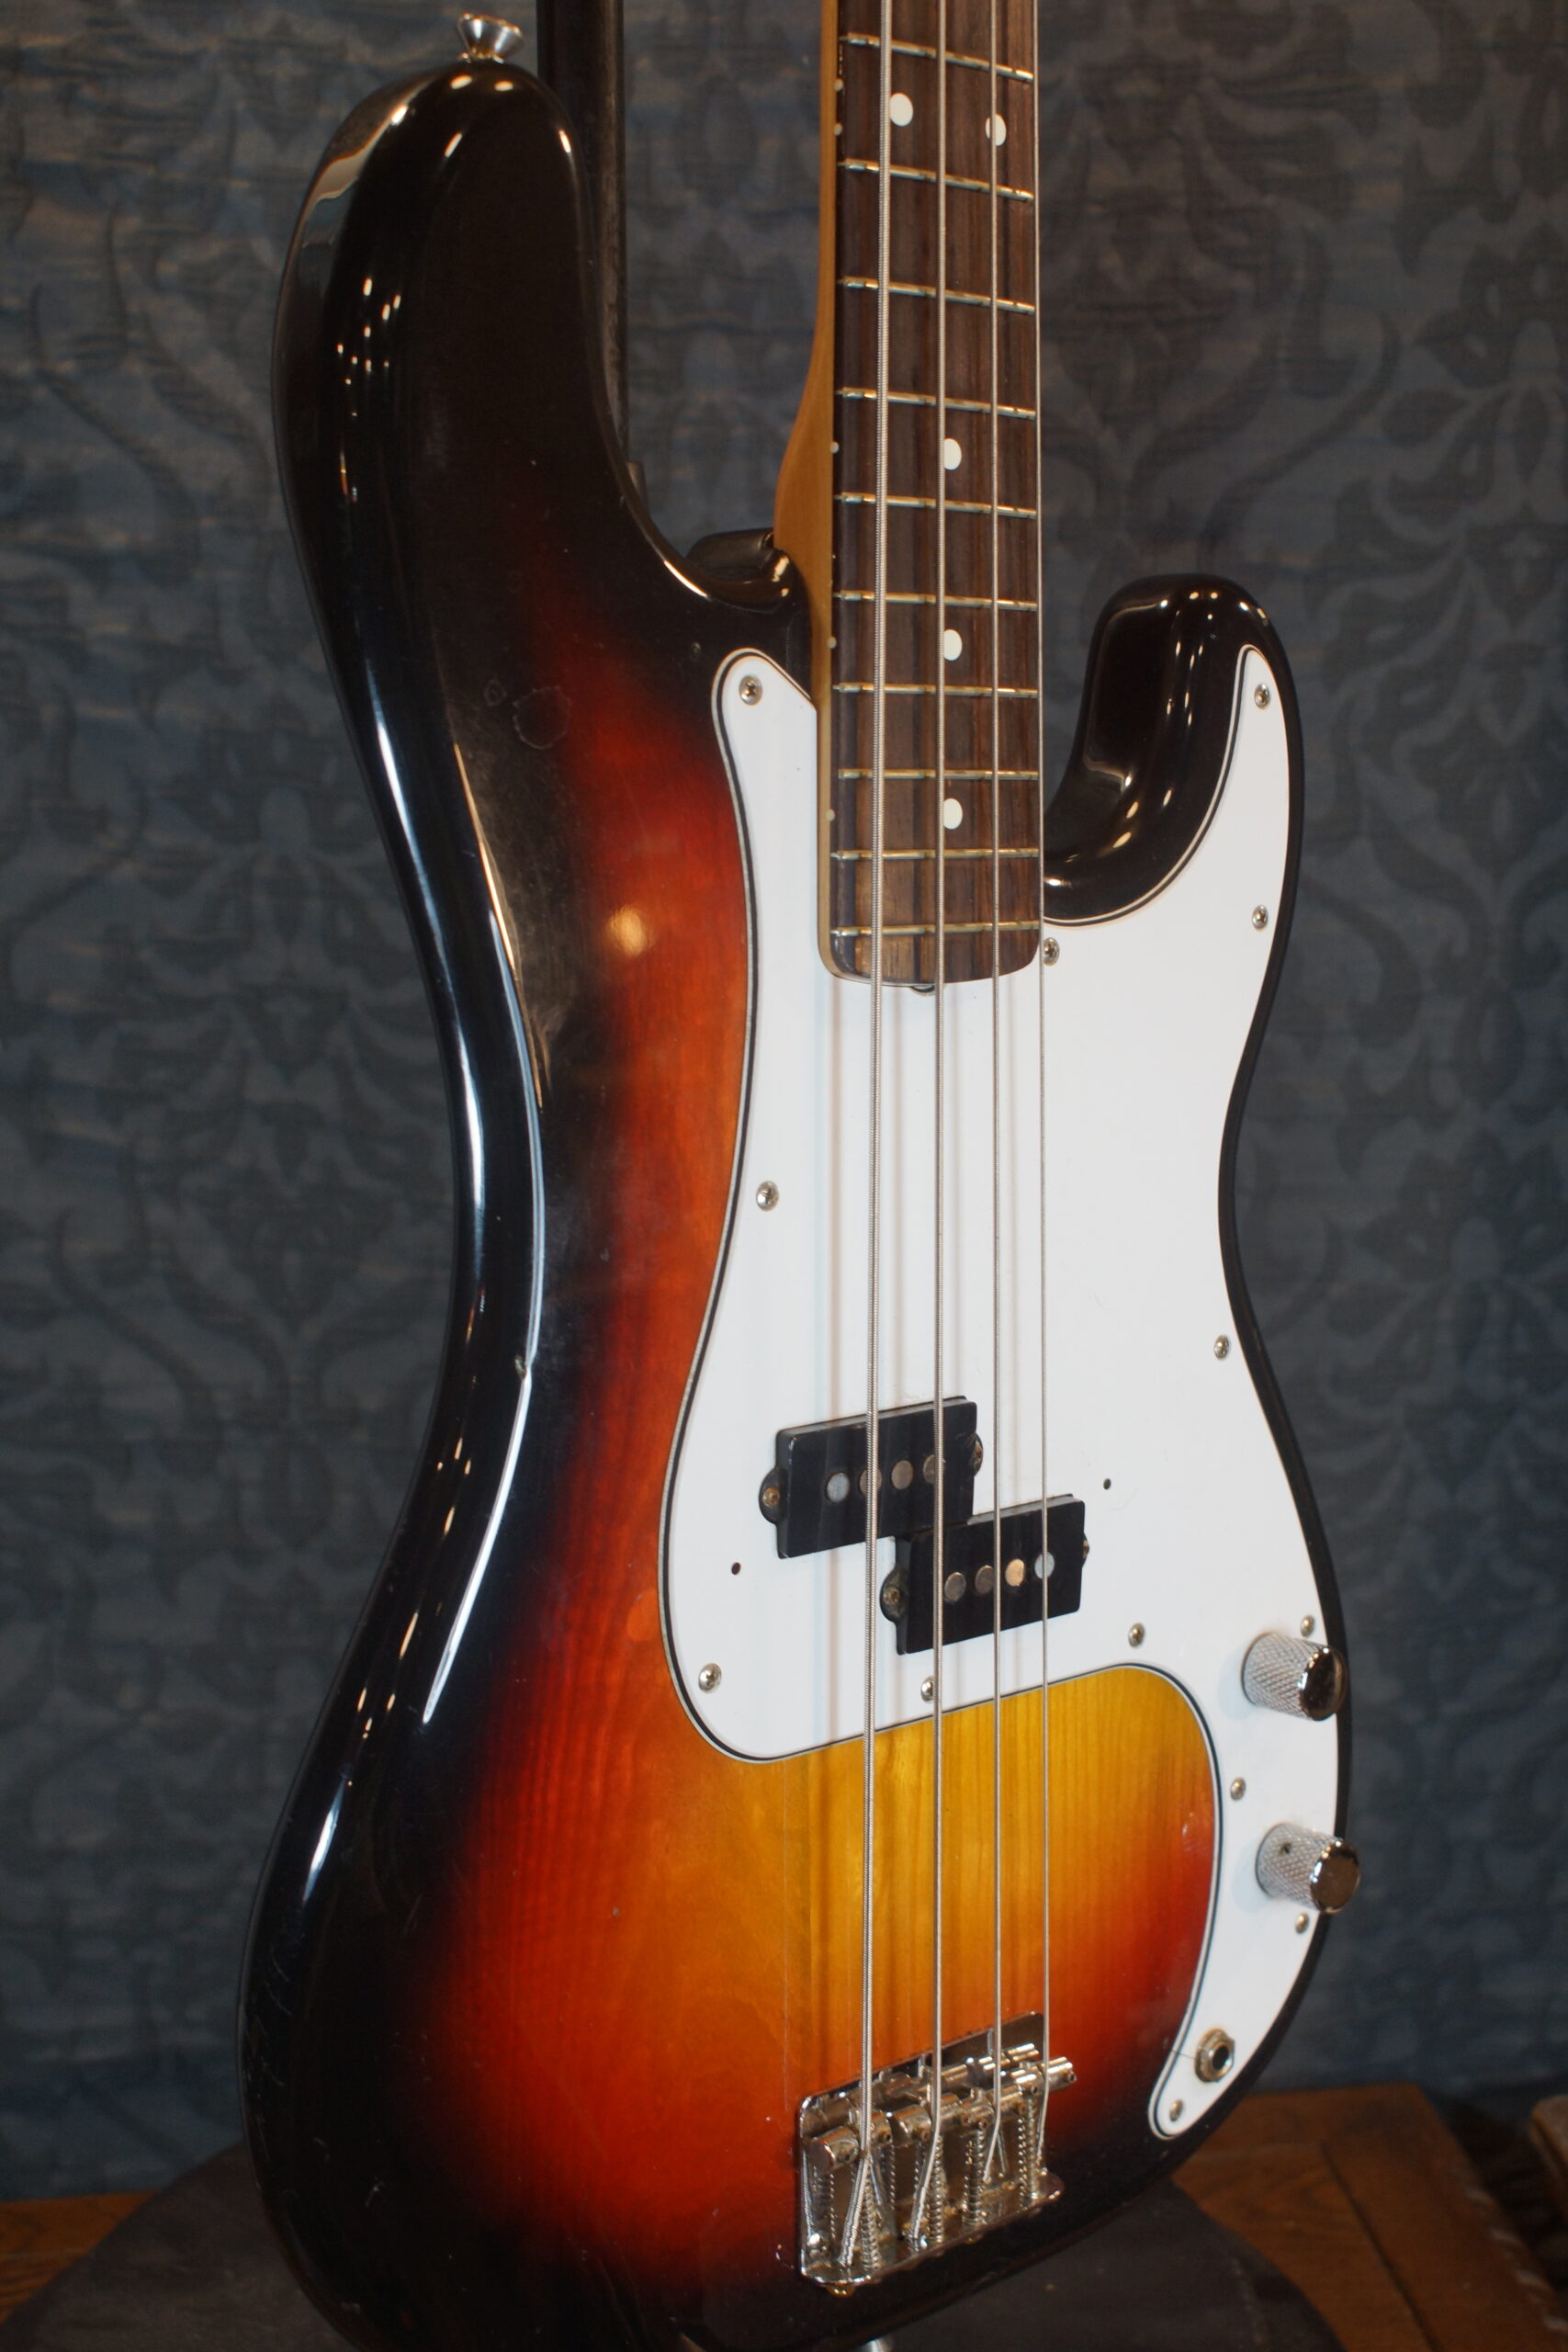 1983 Fender Squier Precision Bass SQ Series Made in Japan